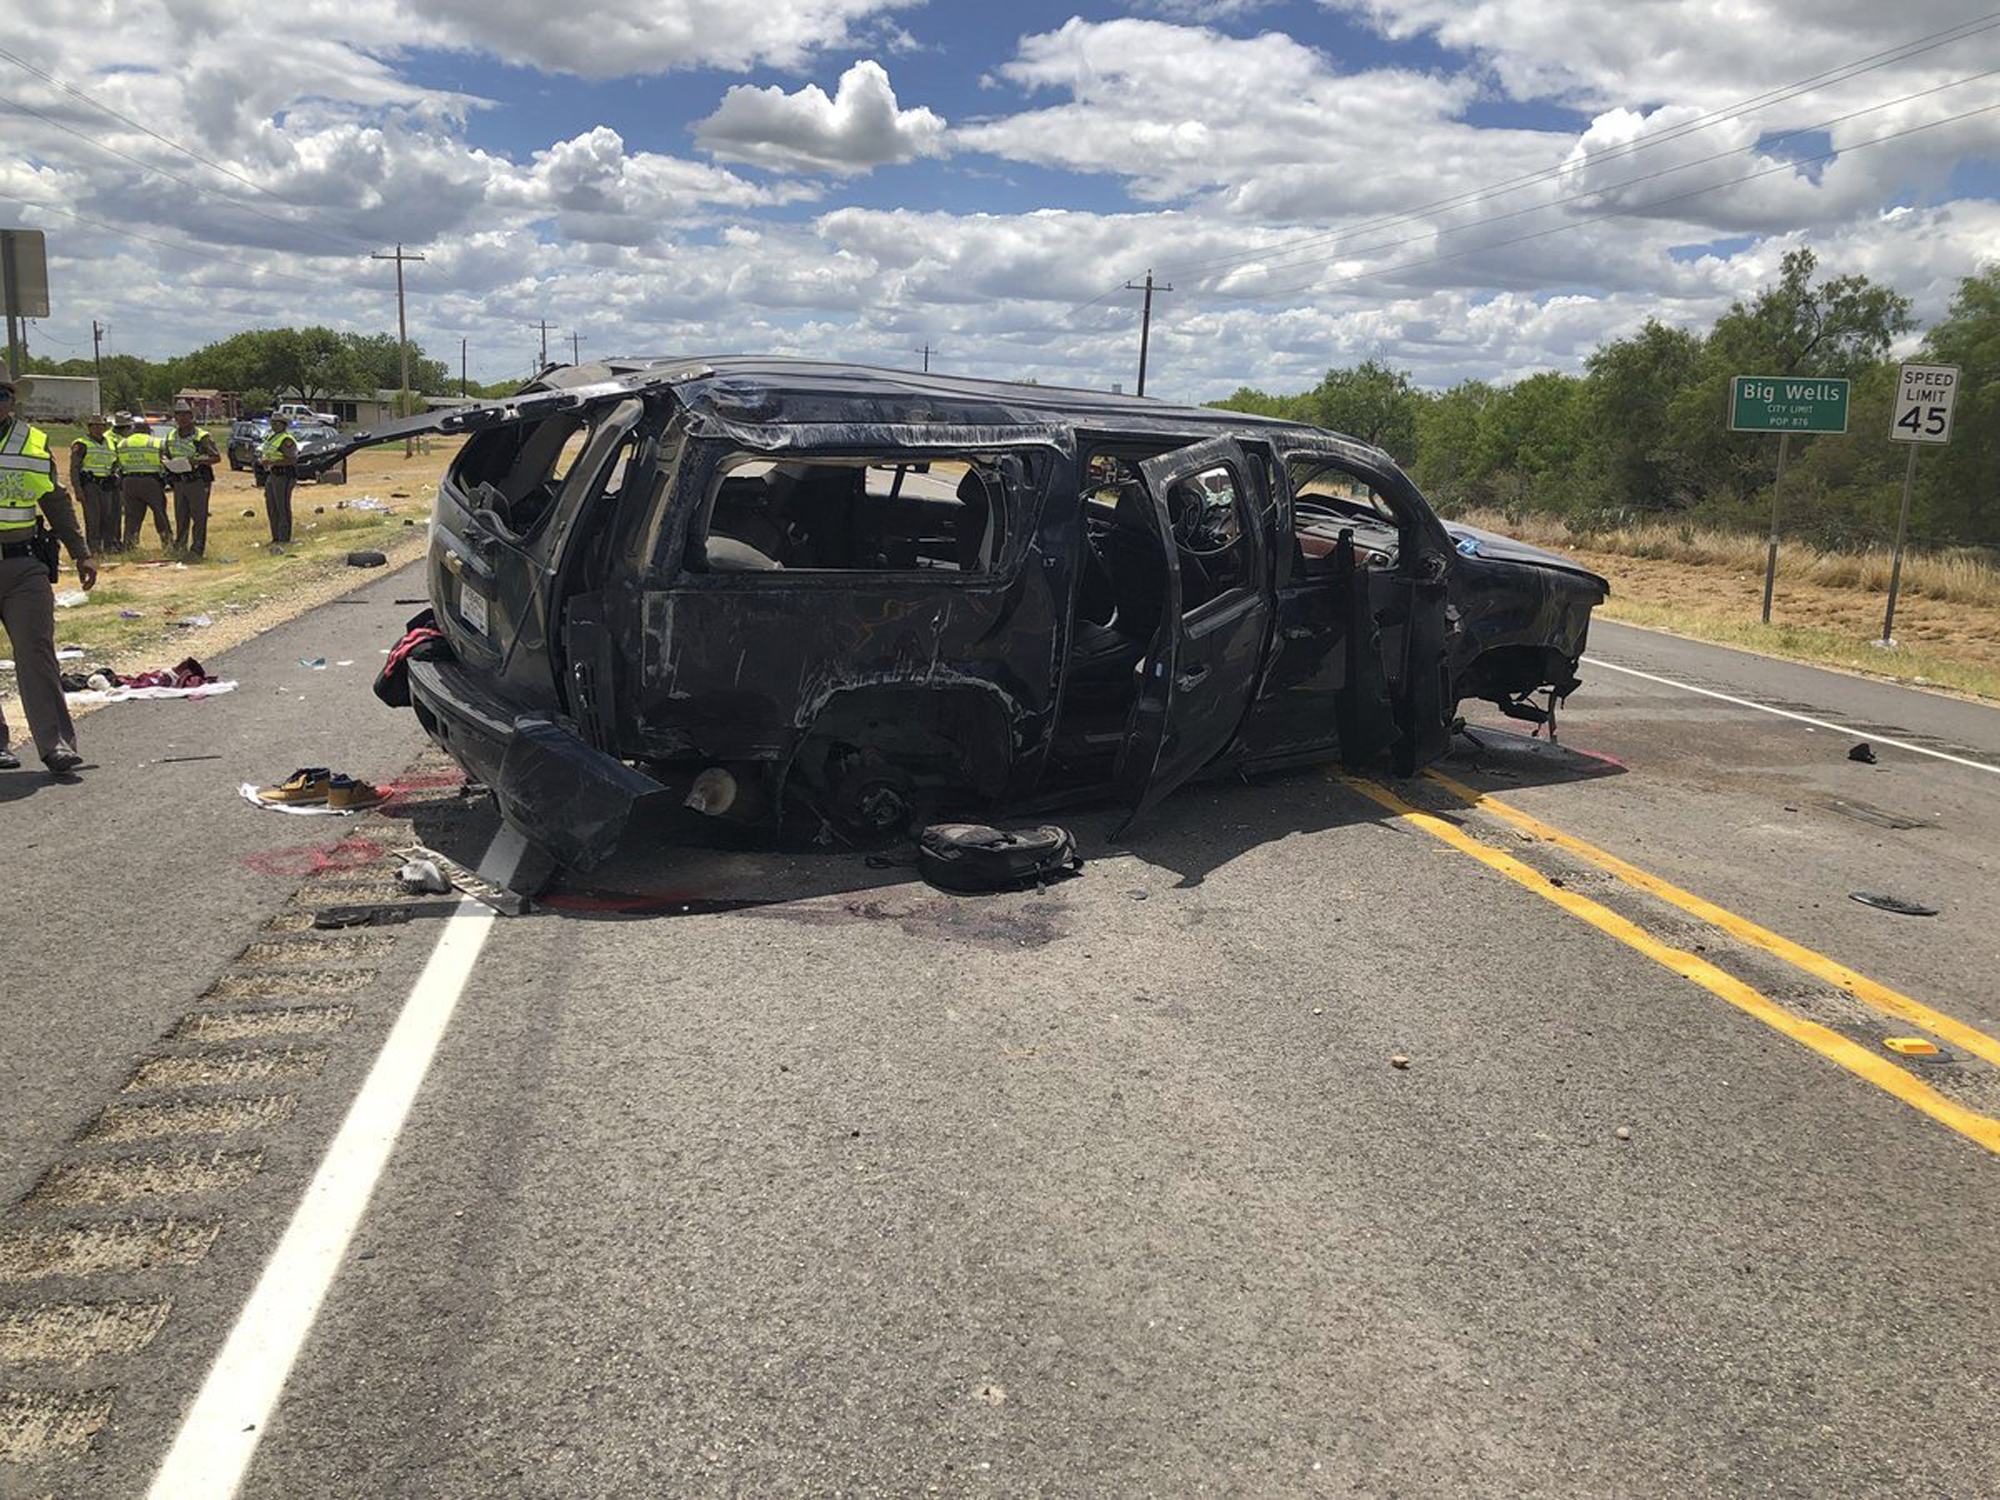 This SUV crashed after a chase with Border Patrol agents.